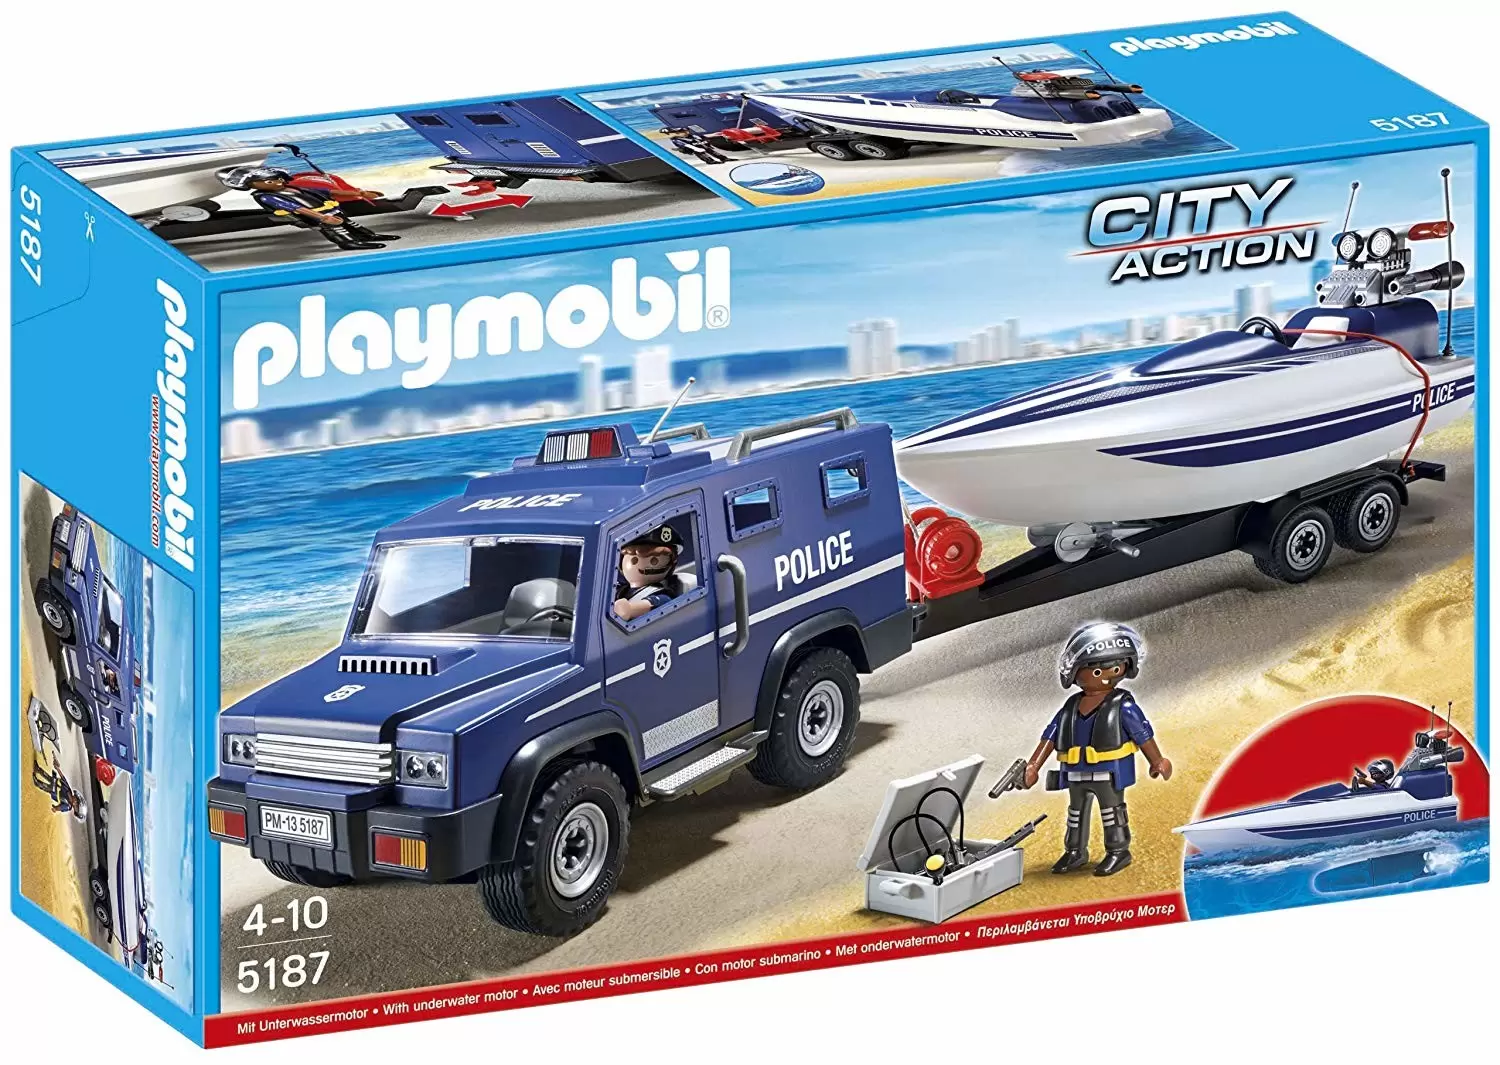 Police Playmobil - Police Truck with Boat